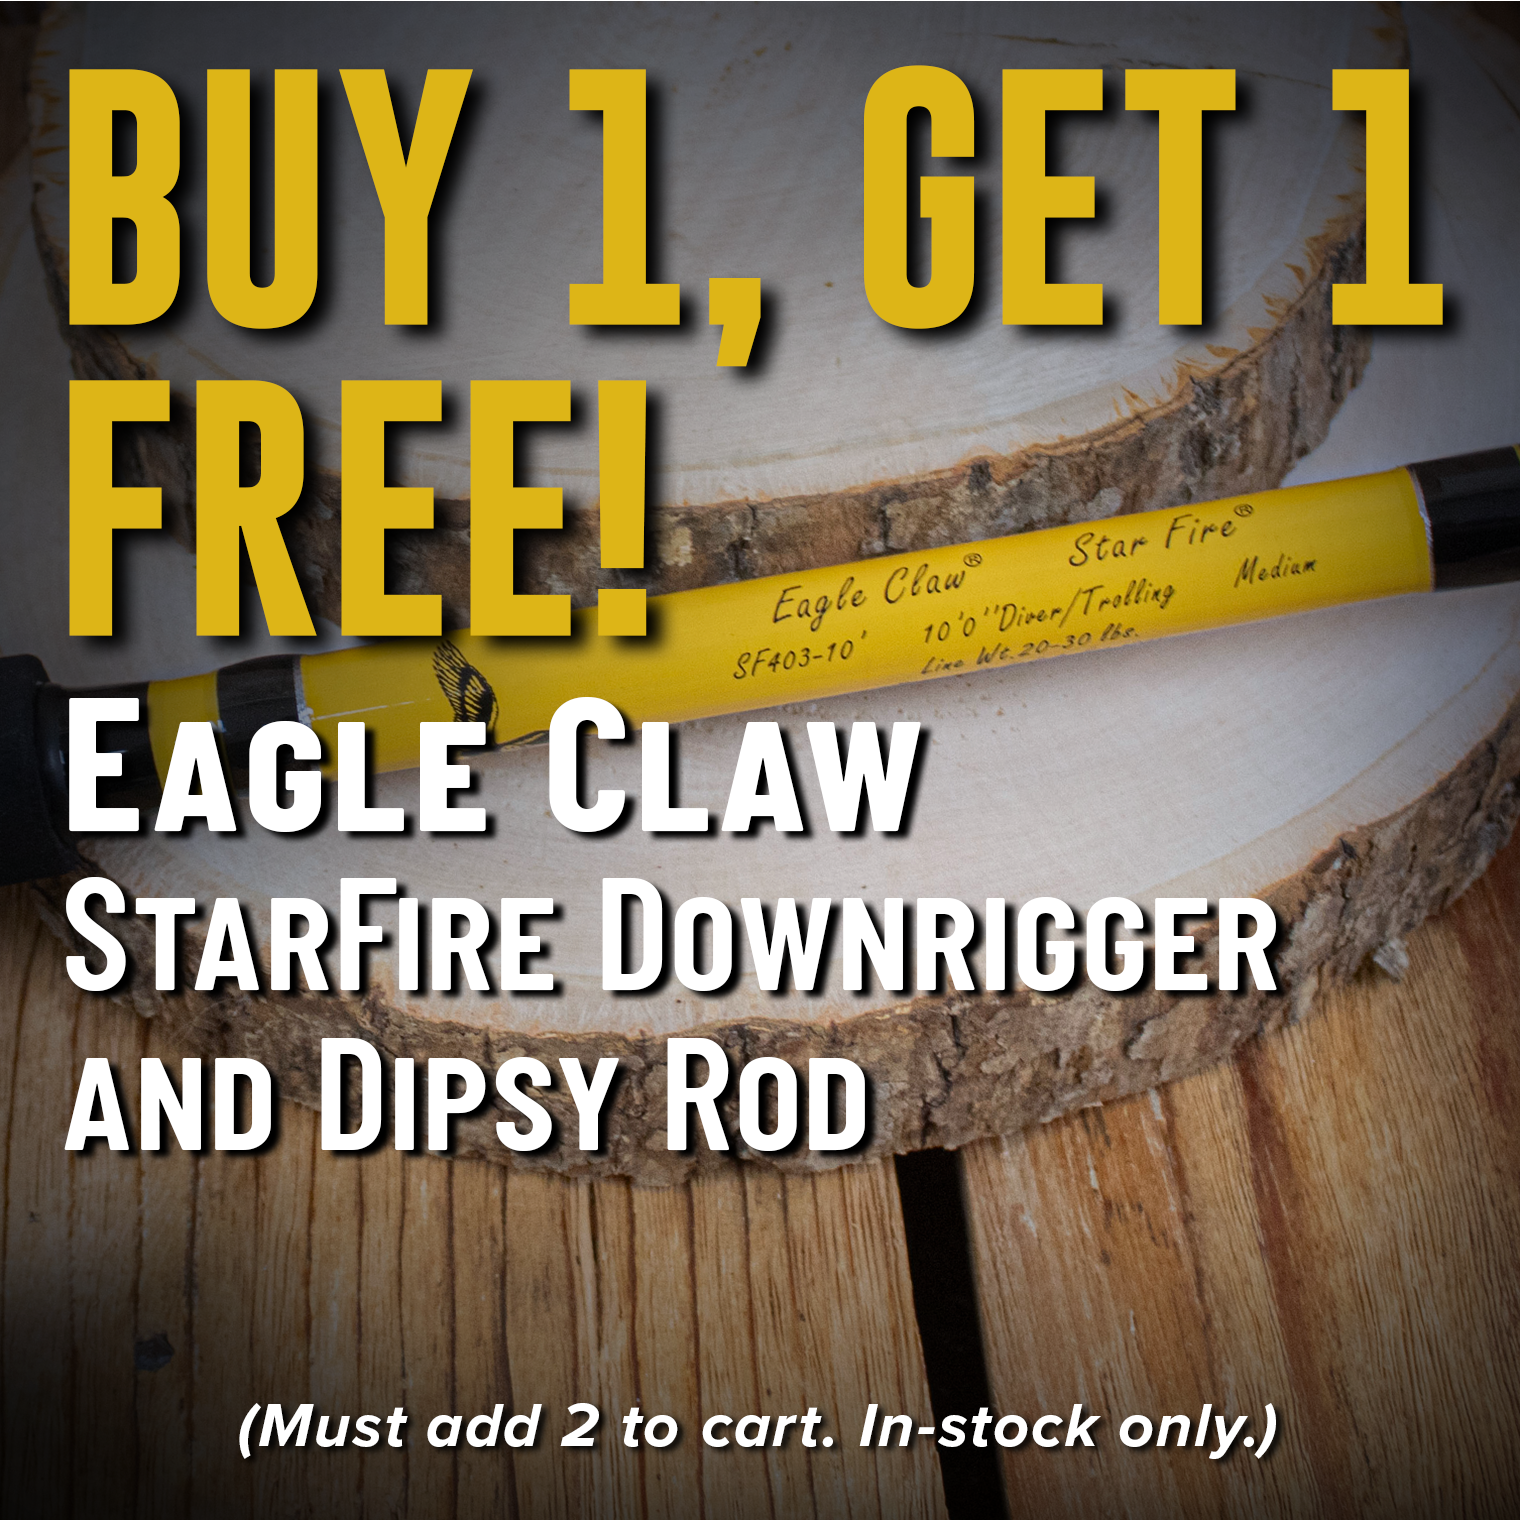 Buy 1, Get 1 Free! Eagle Claw StarFire Downrigger and Dipsy Rod (Must add 2 to cart. In-stock only.)